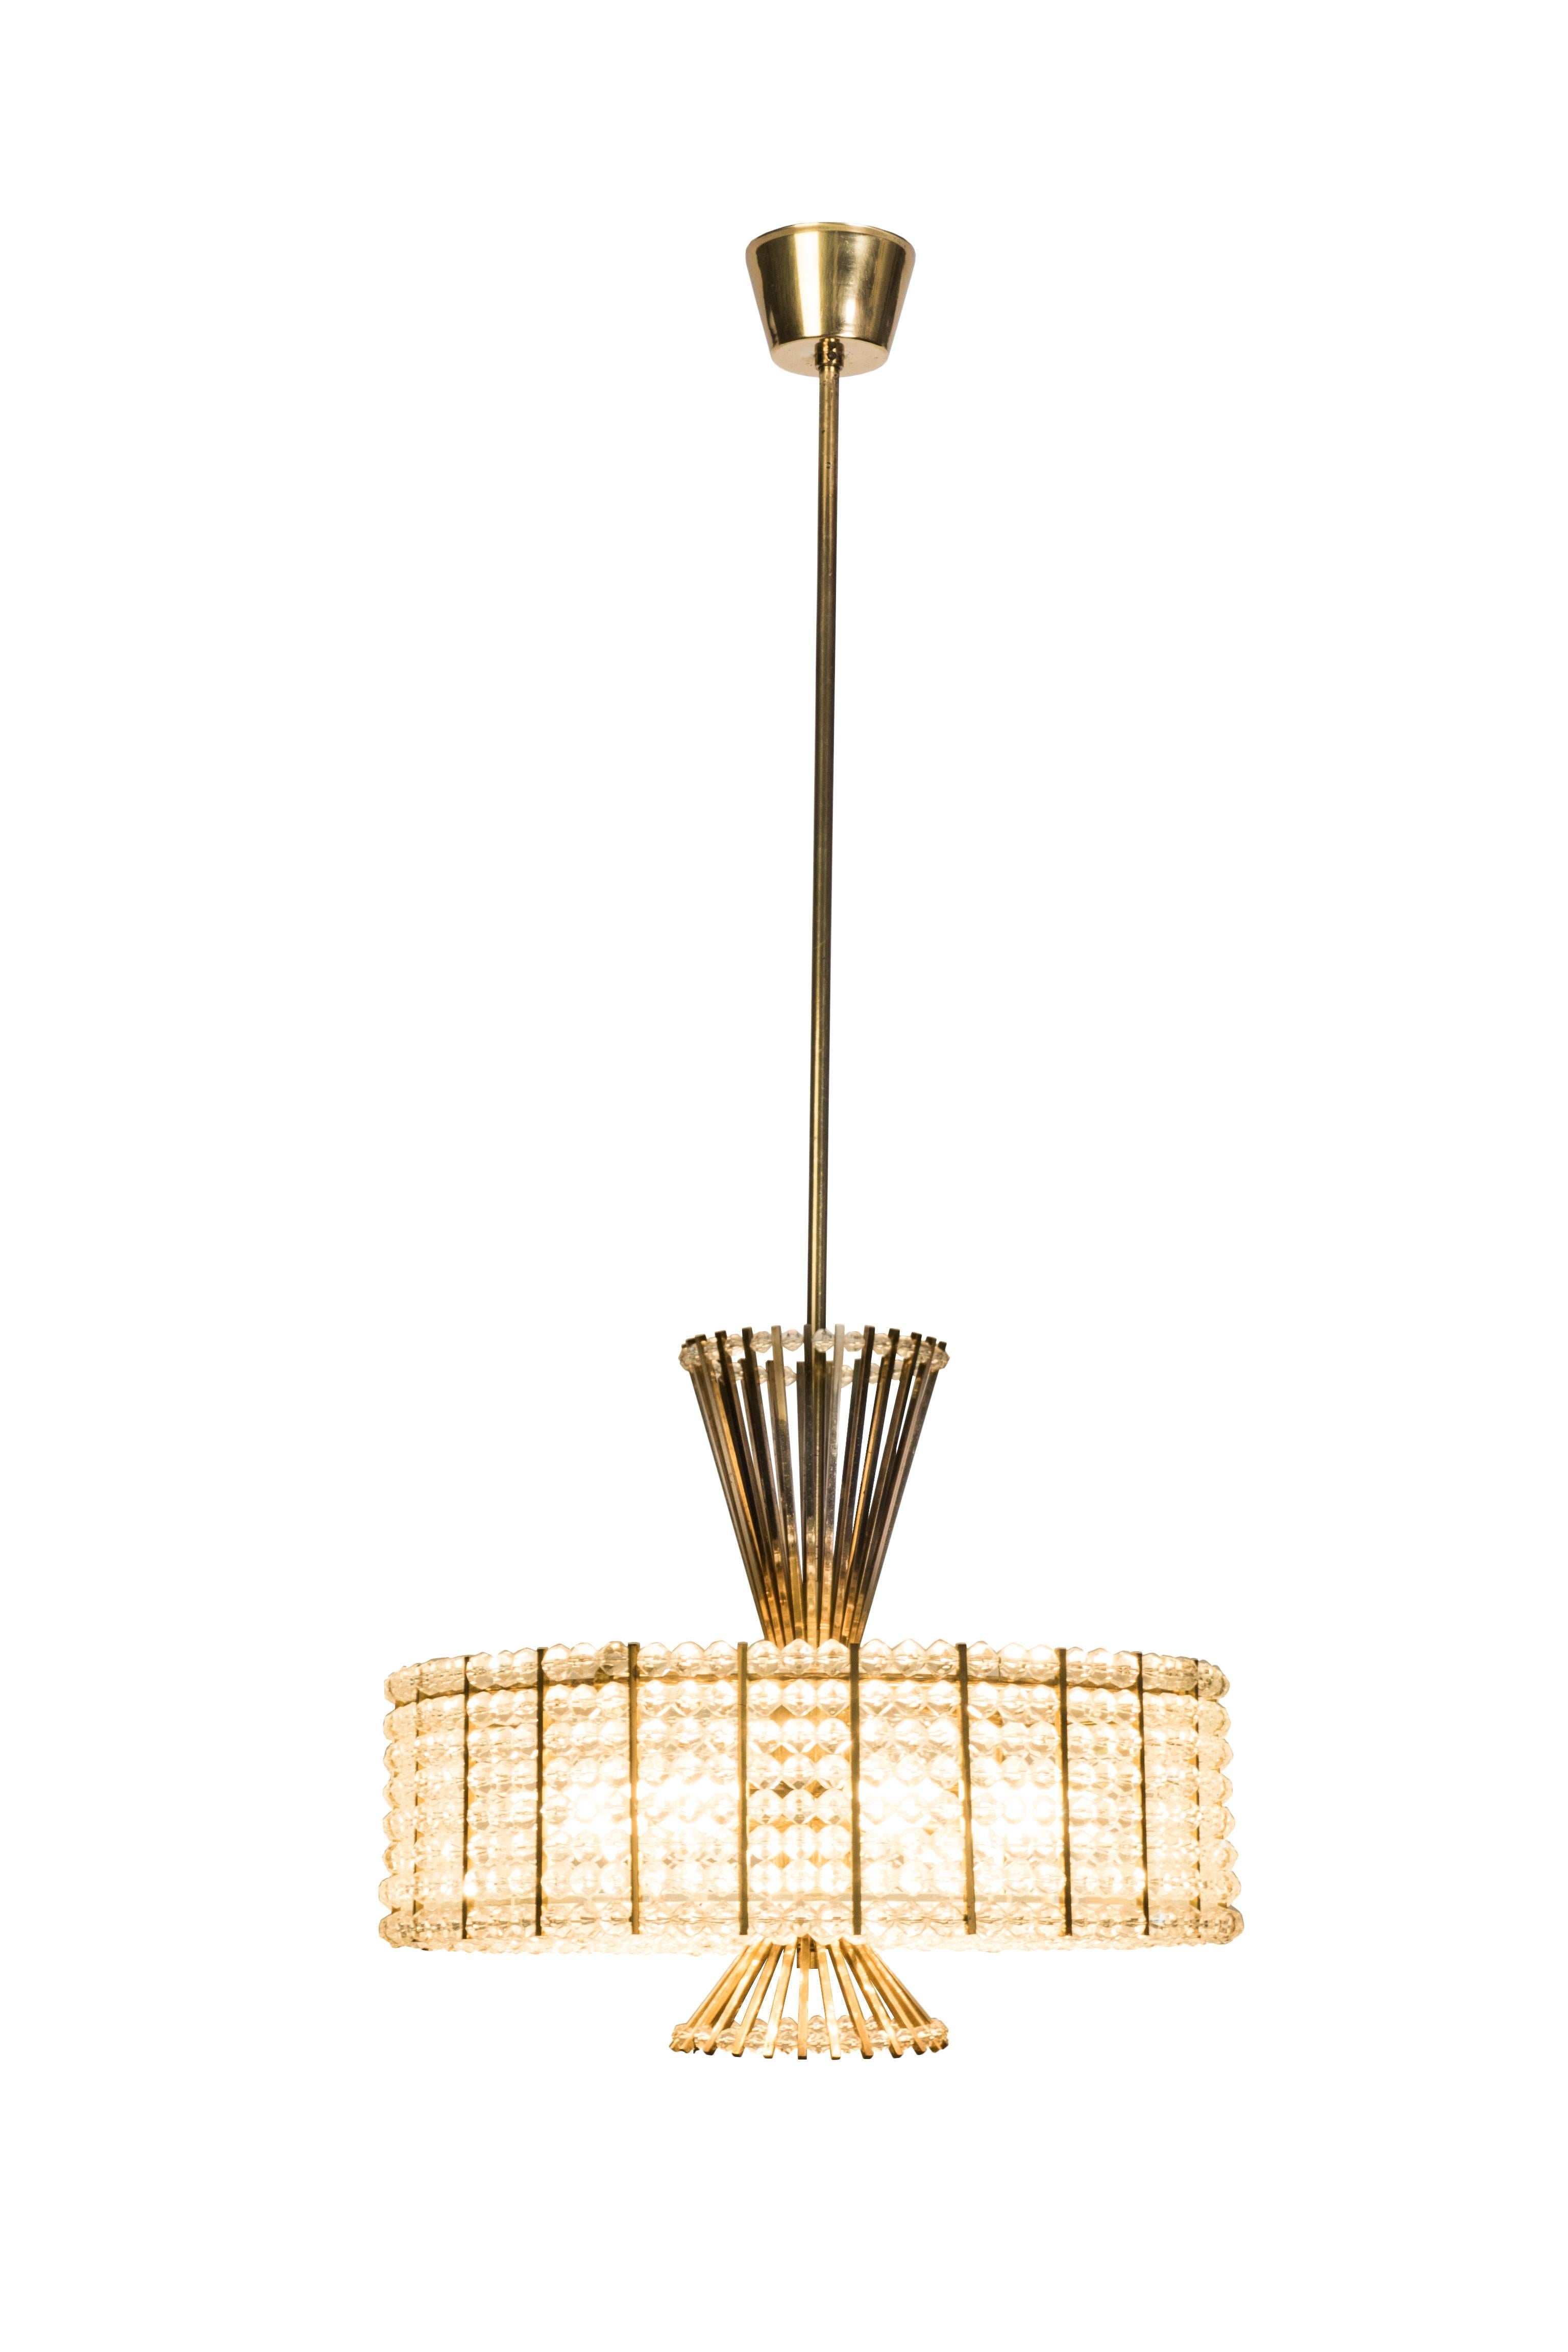 This sensational Mid-Century Modernist chandelier was designed by Emil Stejnar For Rupert Nikoll. It features a circular drum of Lucite and acrylic chain detailing connected to a brass base with conical form lines protruding from the top and bottom